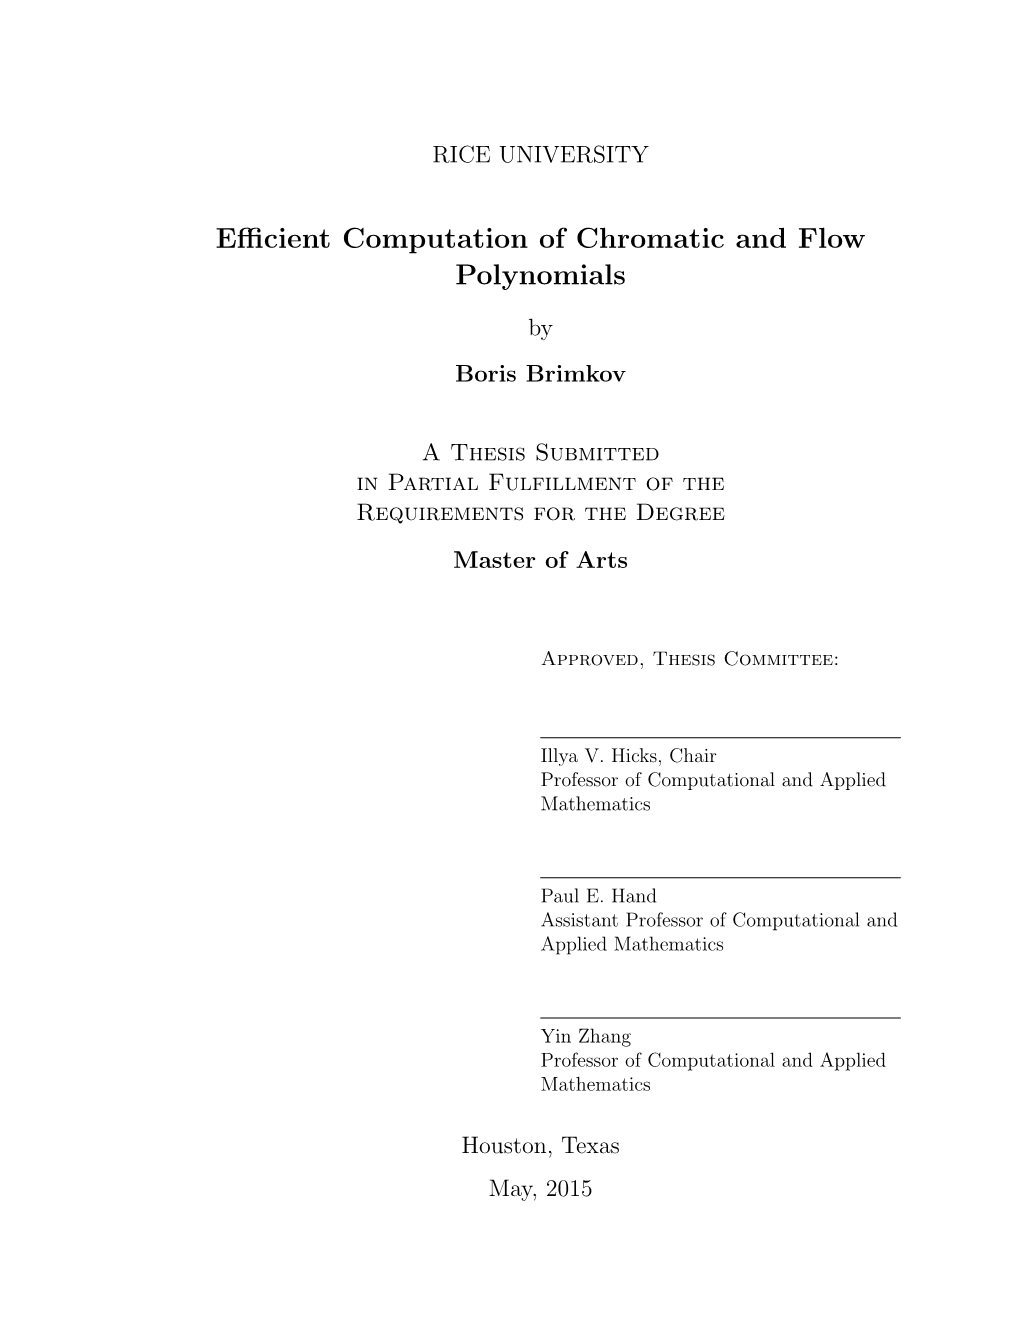 Efficient Computation of Chromatic and Flow Polynomials